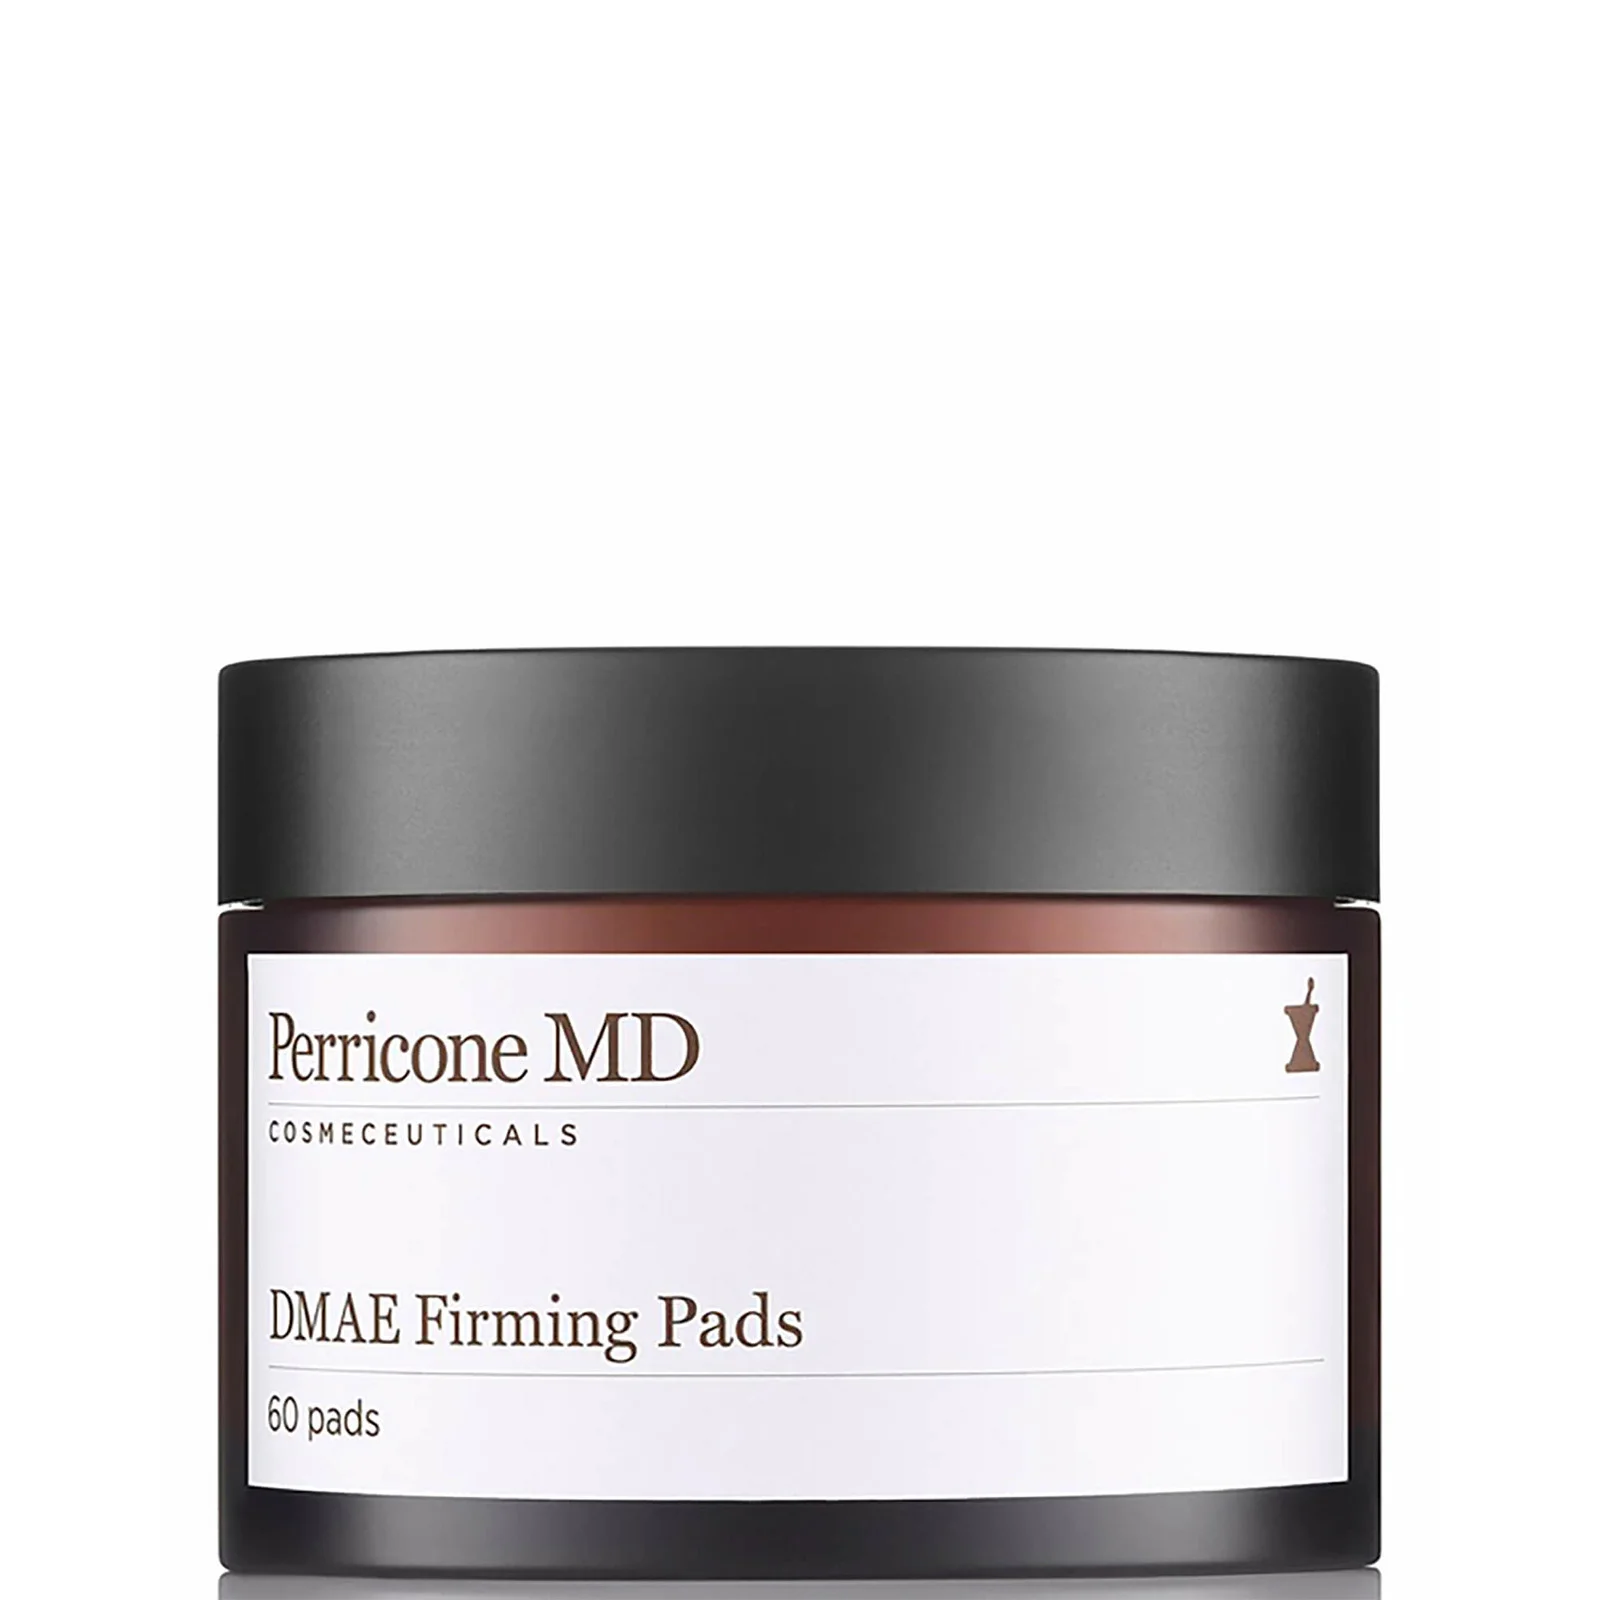 Perricone MD DMAE Firming Pads Image 1